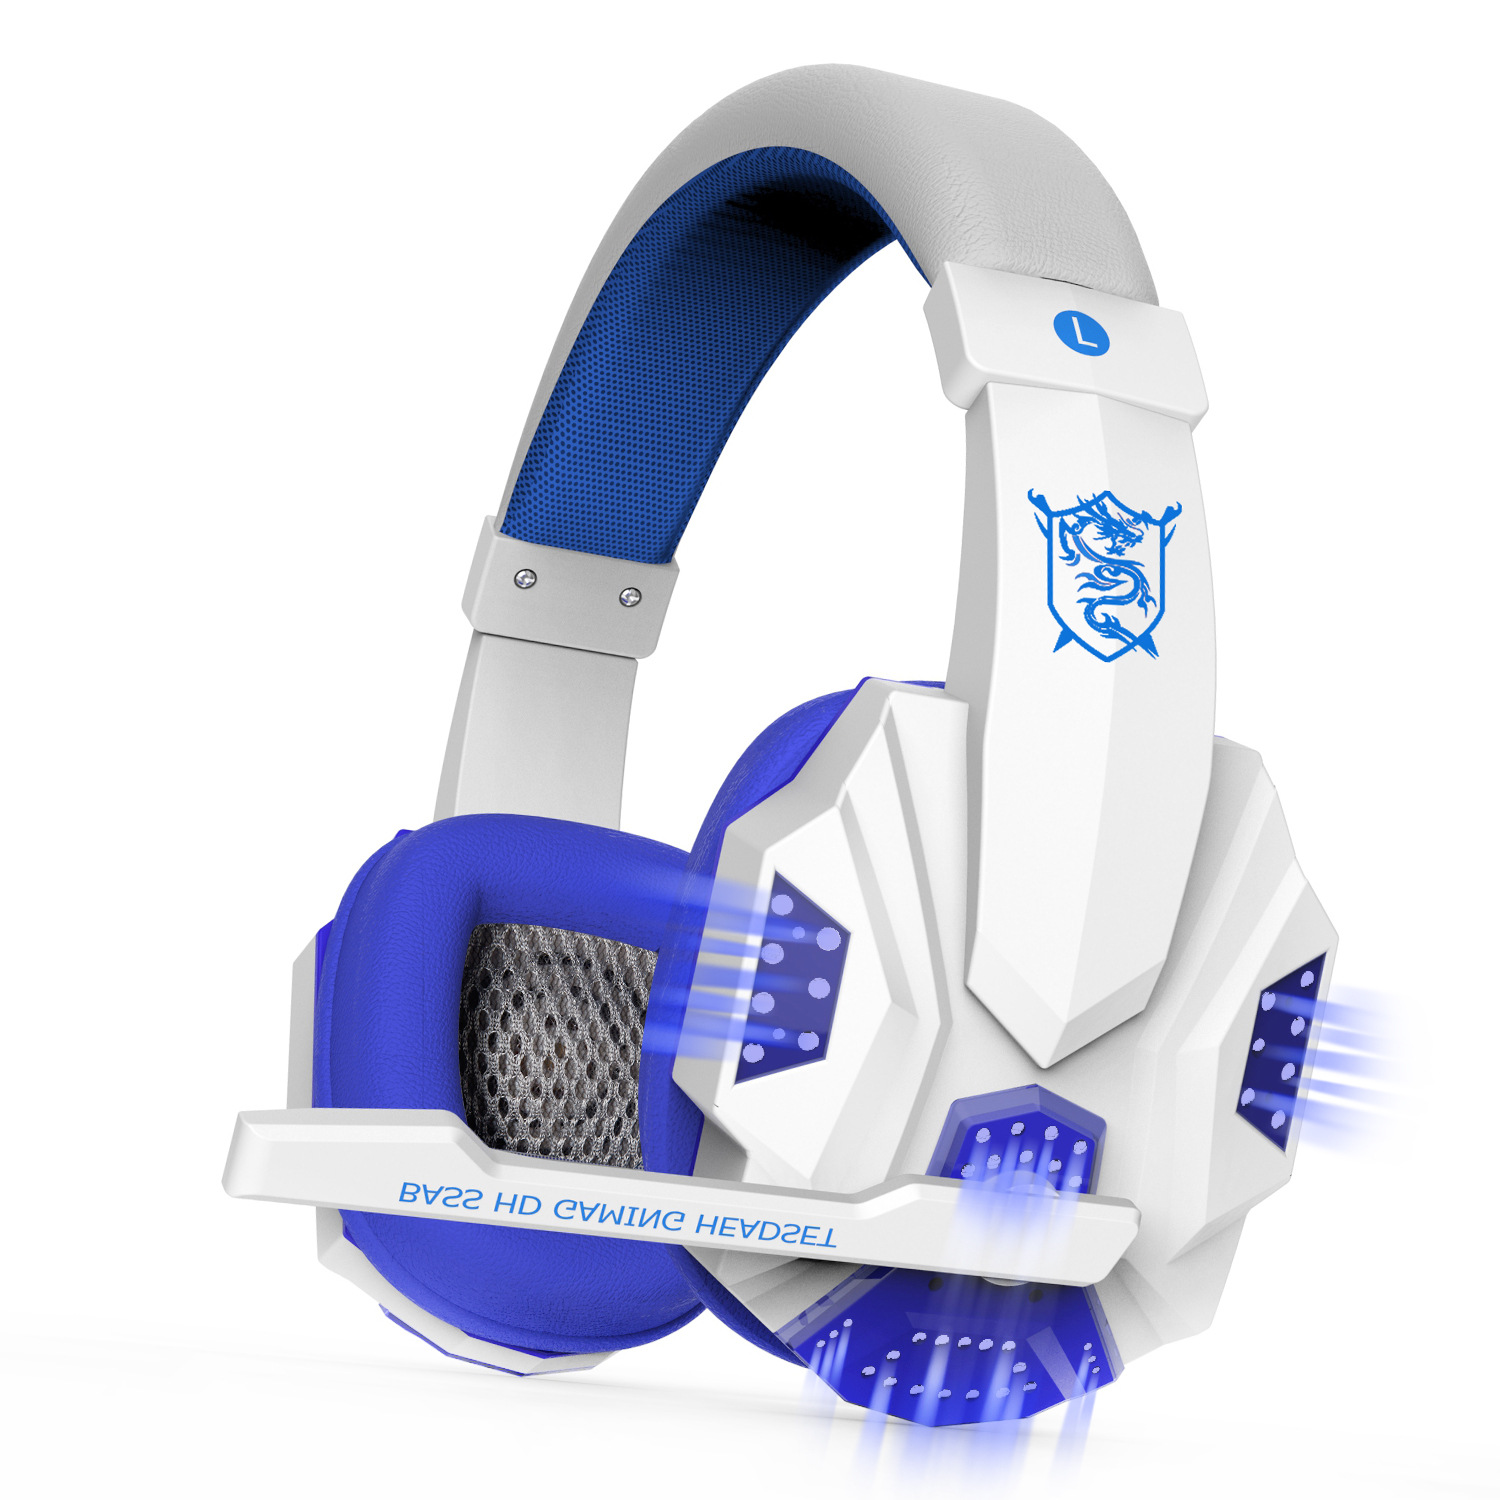 2.2M PC780 Gaming Headsets with Light Mic Stereo Earphones Deep Bass for PC Computer Gamer Laptop White blue glow